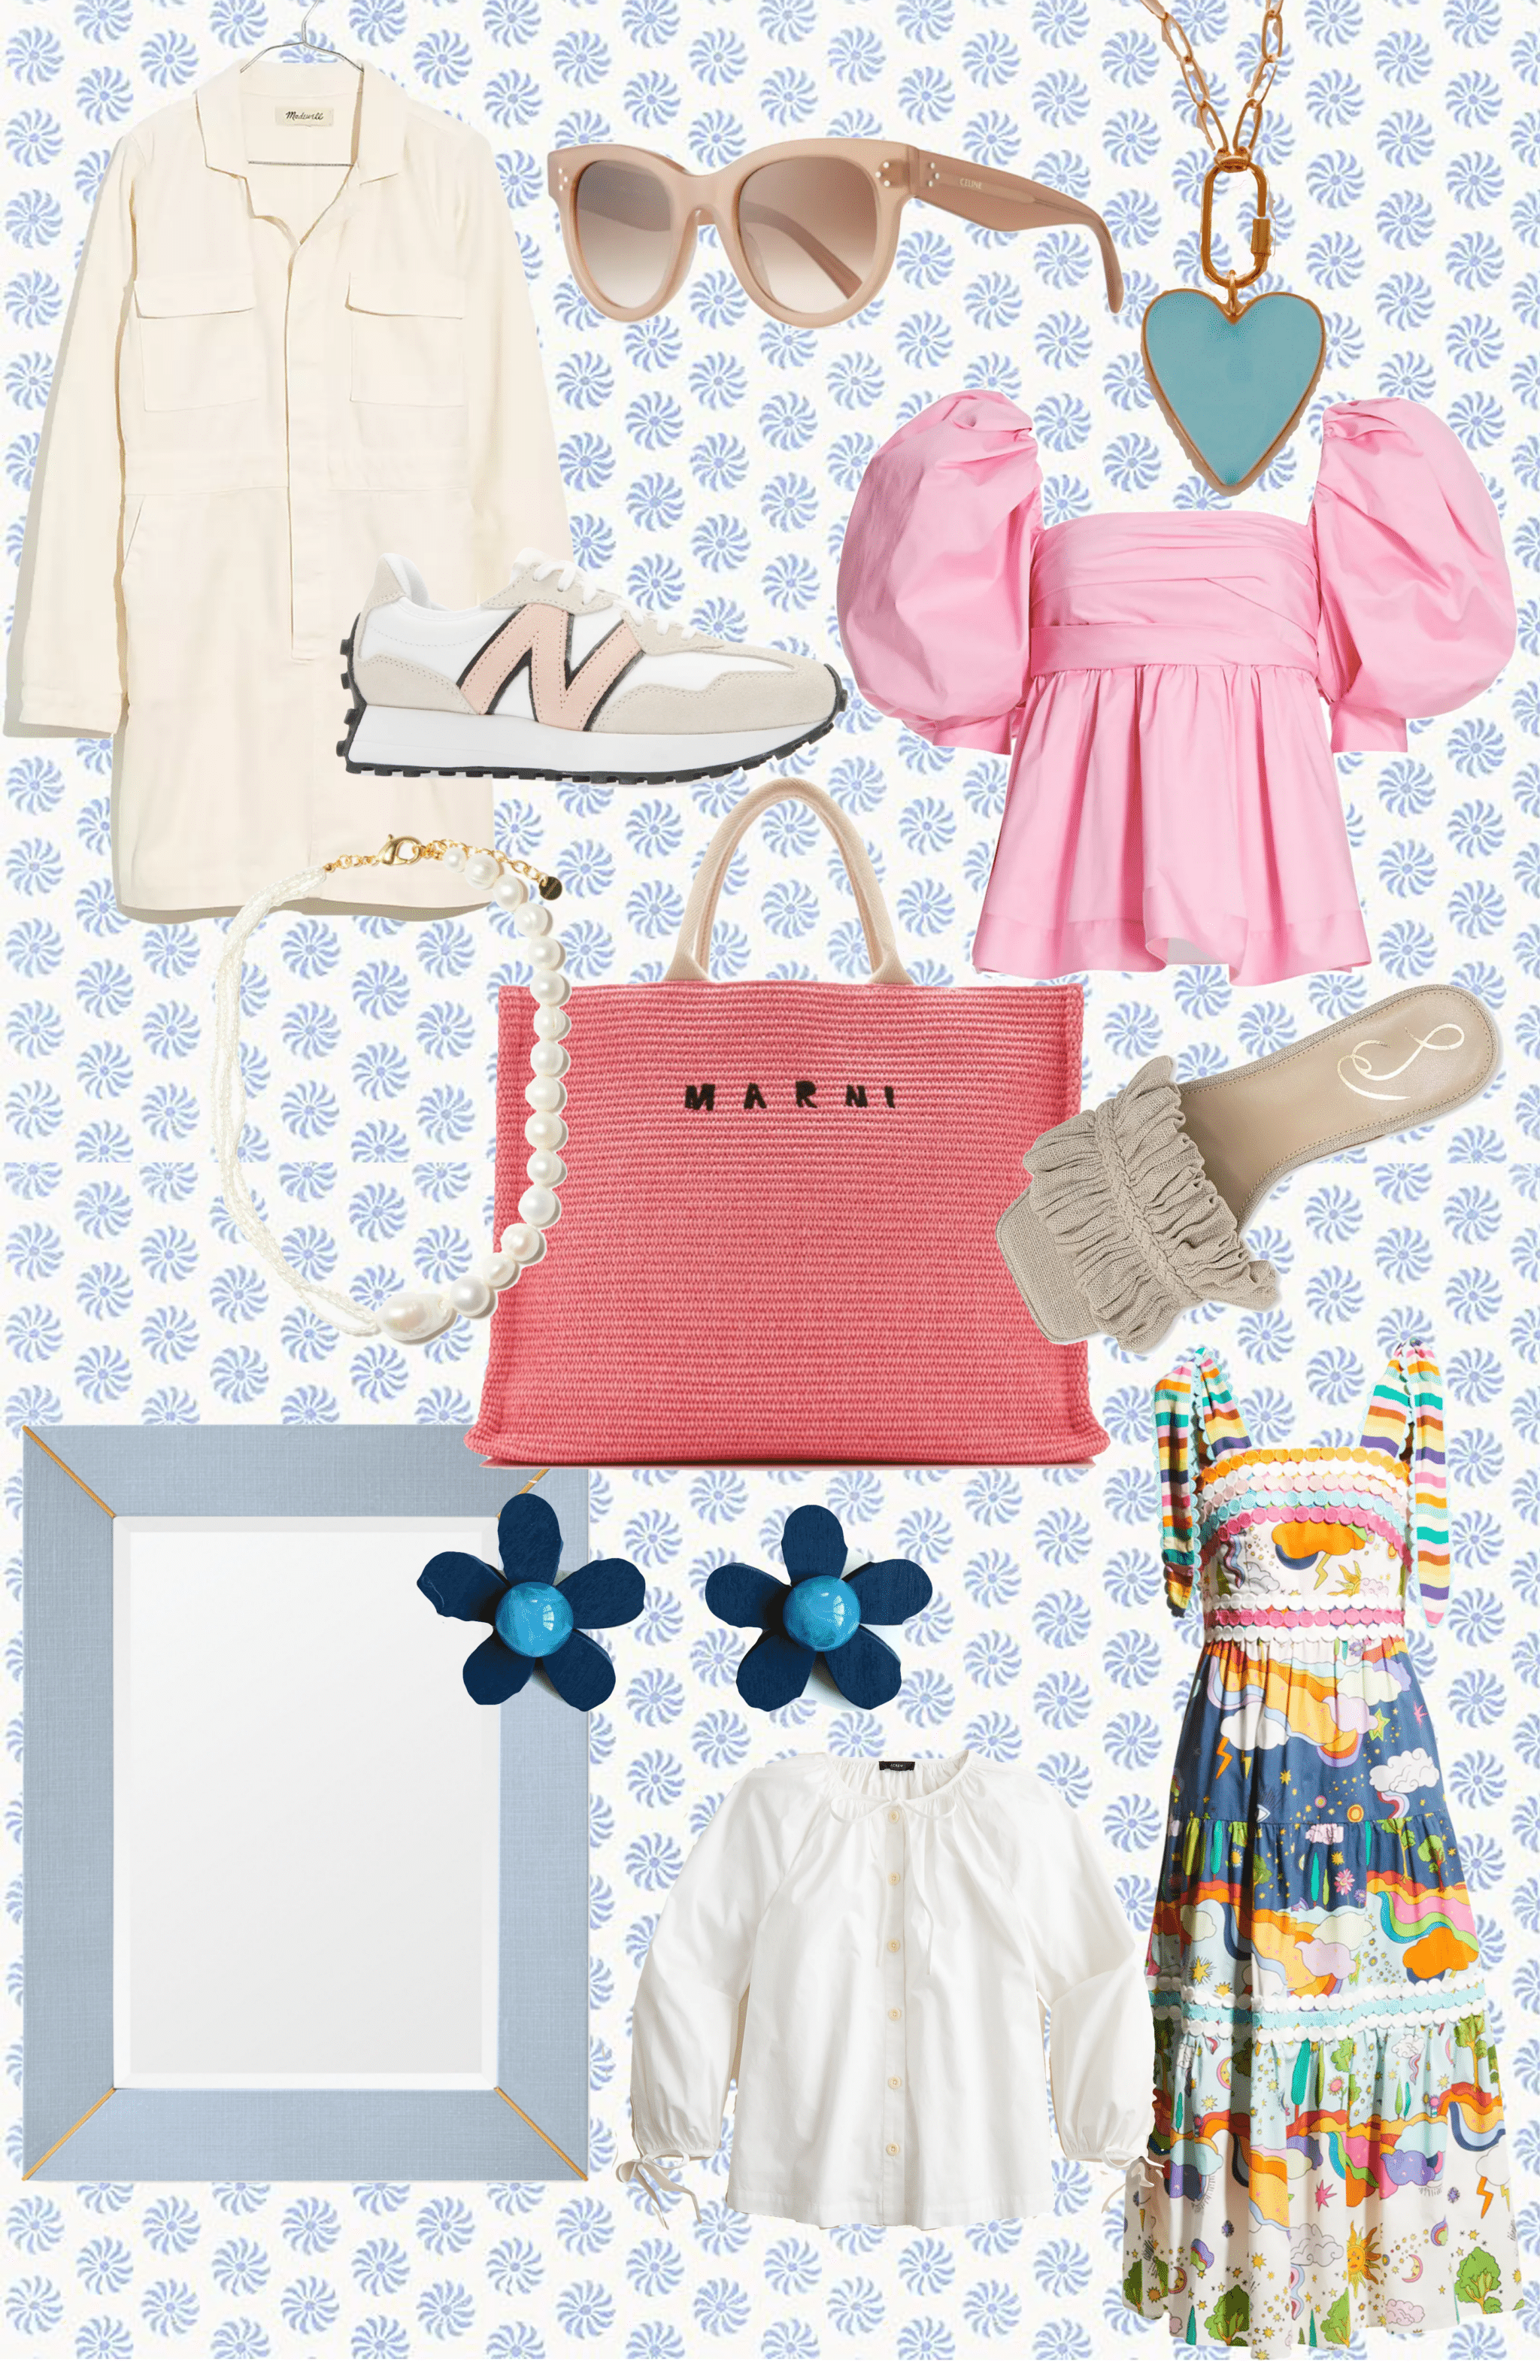 A roundup of my favorite recent discoveries in a rainbow of cheery colors.